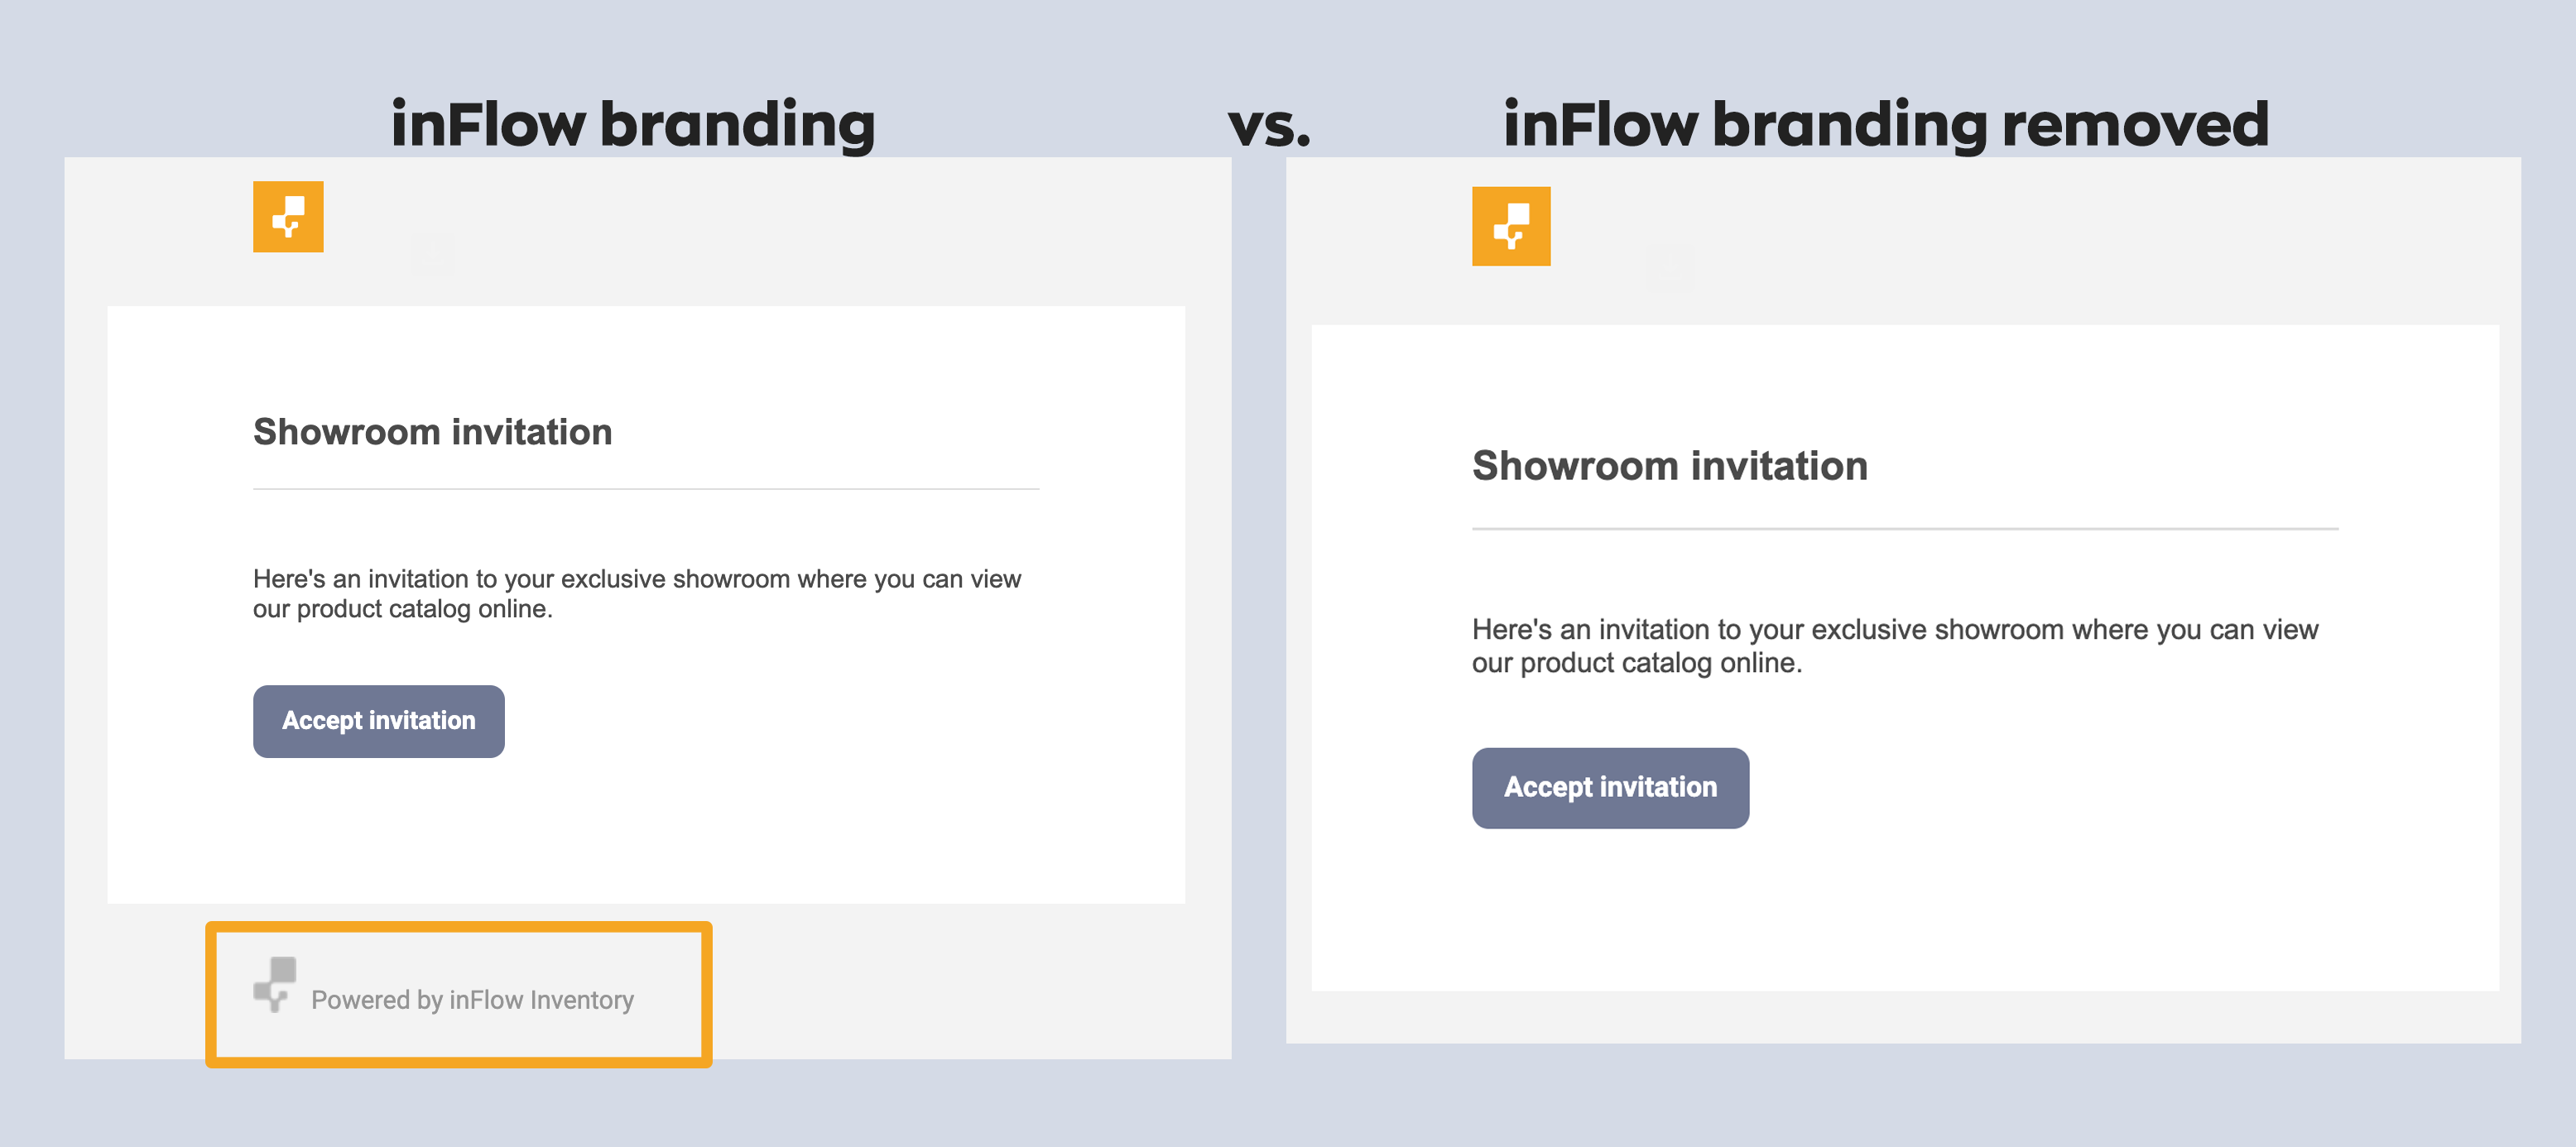 Here's an Online Showroom invitation example: Left: a showroom invitation with inFlow branding. Right: a showroom invitation with the inFlow branding removed.